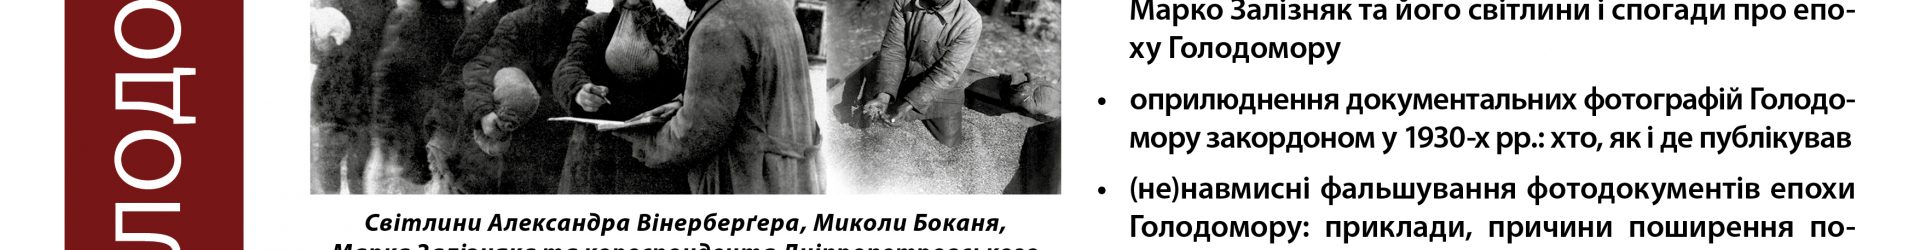 New Evidence about Historical Photographs of the Holodomor